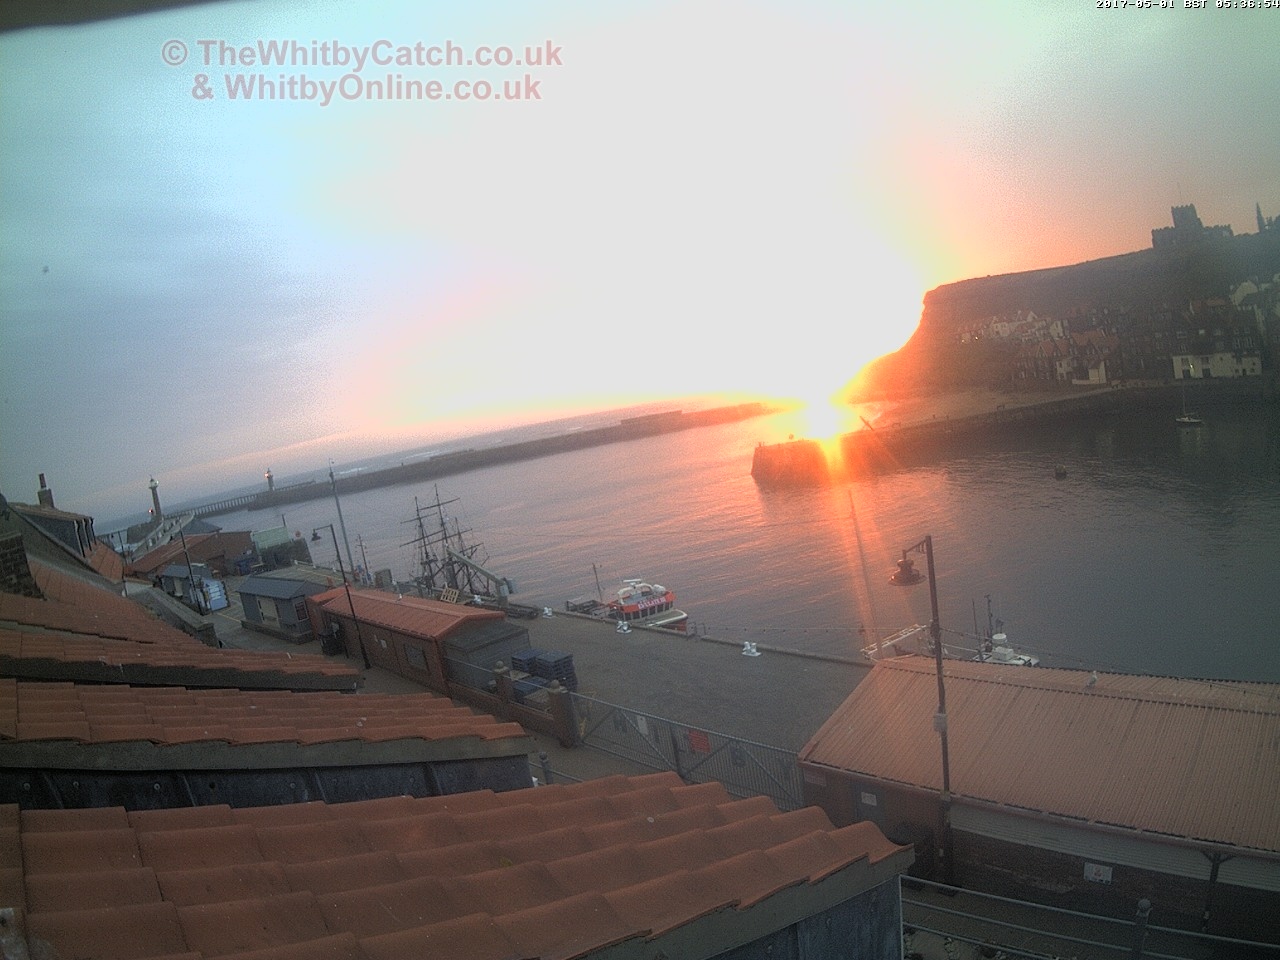 Whitby Mon 1st May 2017 05:37.